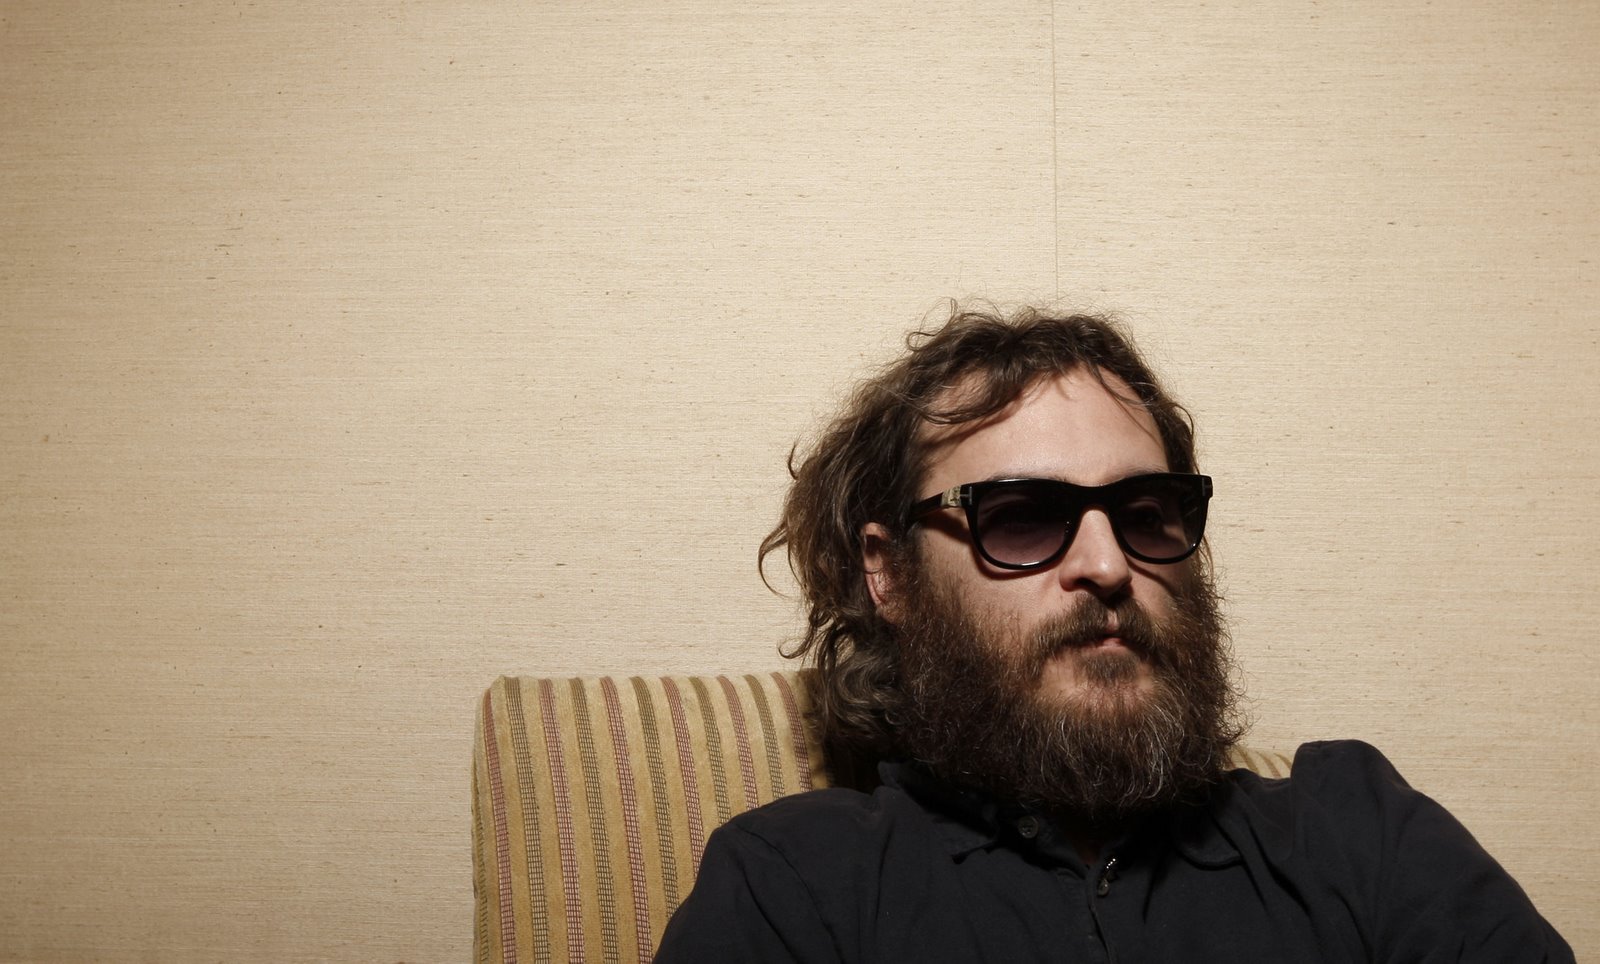 Actor Joaquin Phoenix poses for a portrait in Beverly Hills. He has a huge beard and is looking very scruffy.